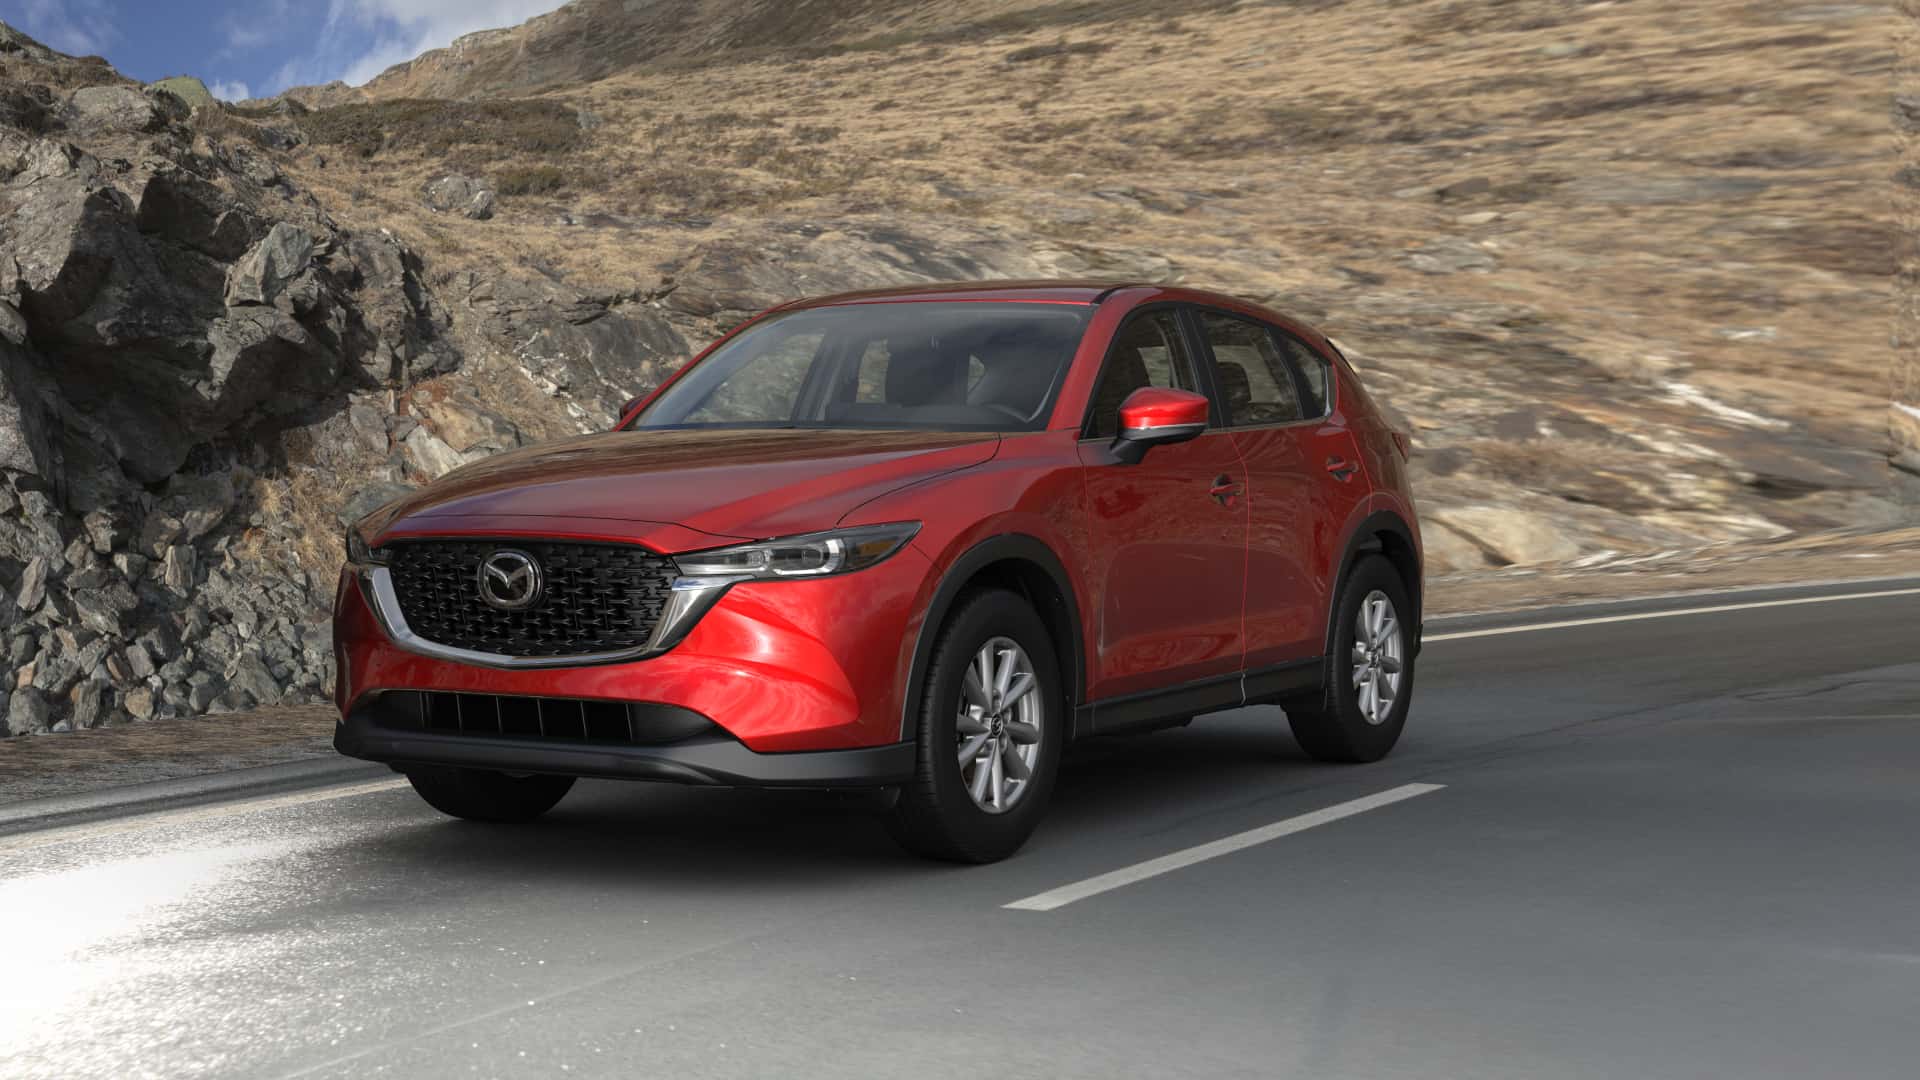 2023 Mazda CX-5 2.5 S Soul Red Crystal Metallic | Bommarito Mazda South County in St. Louis MO